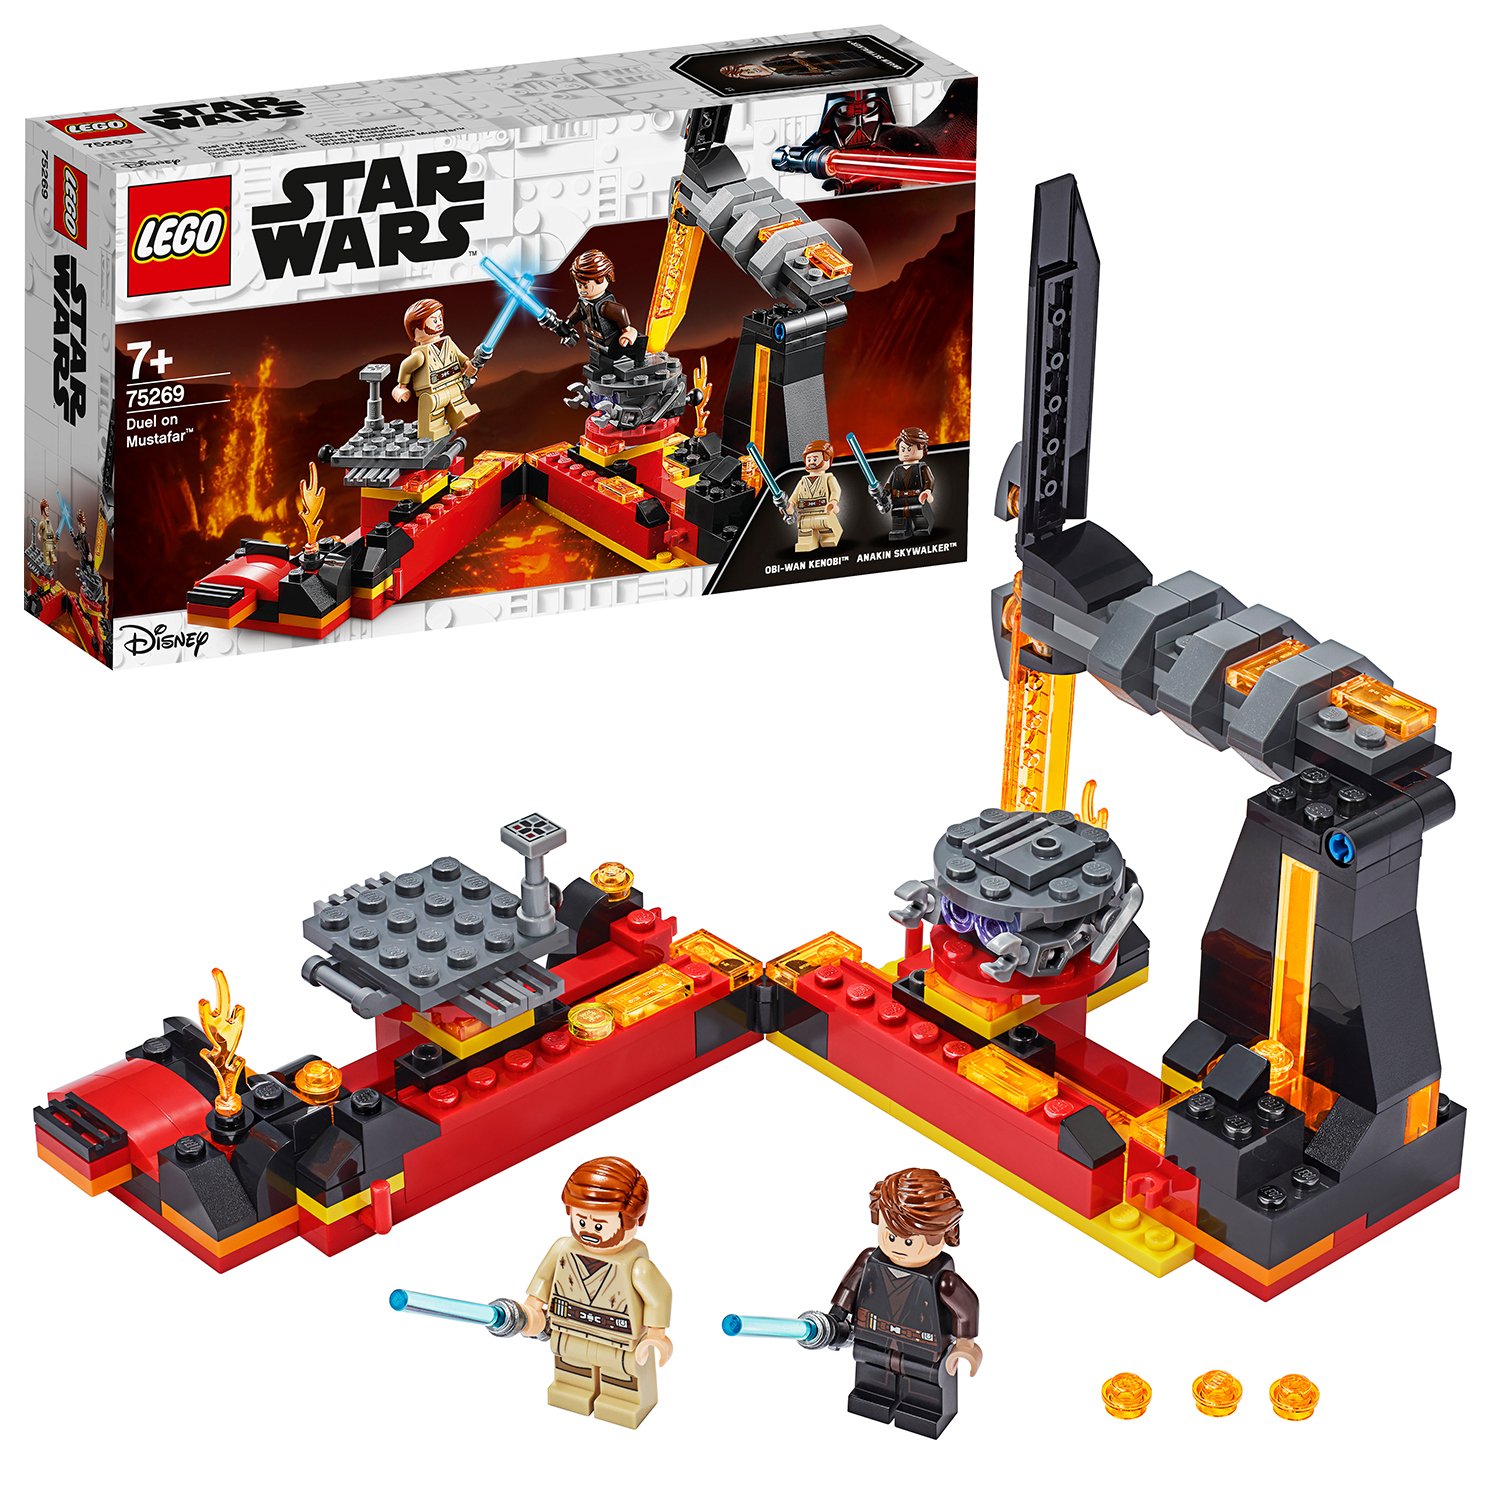 LEGO Star Wars Duel on Mustafar Playset Review